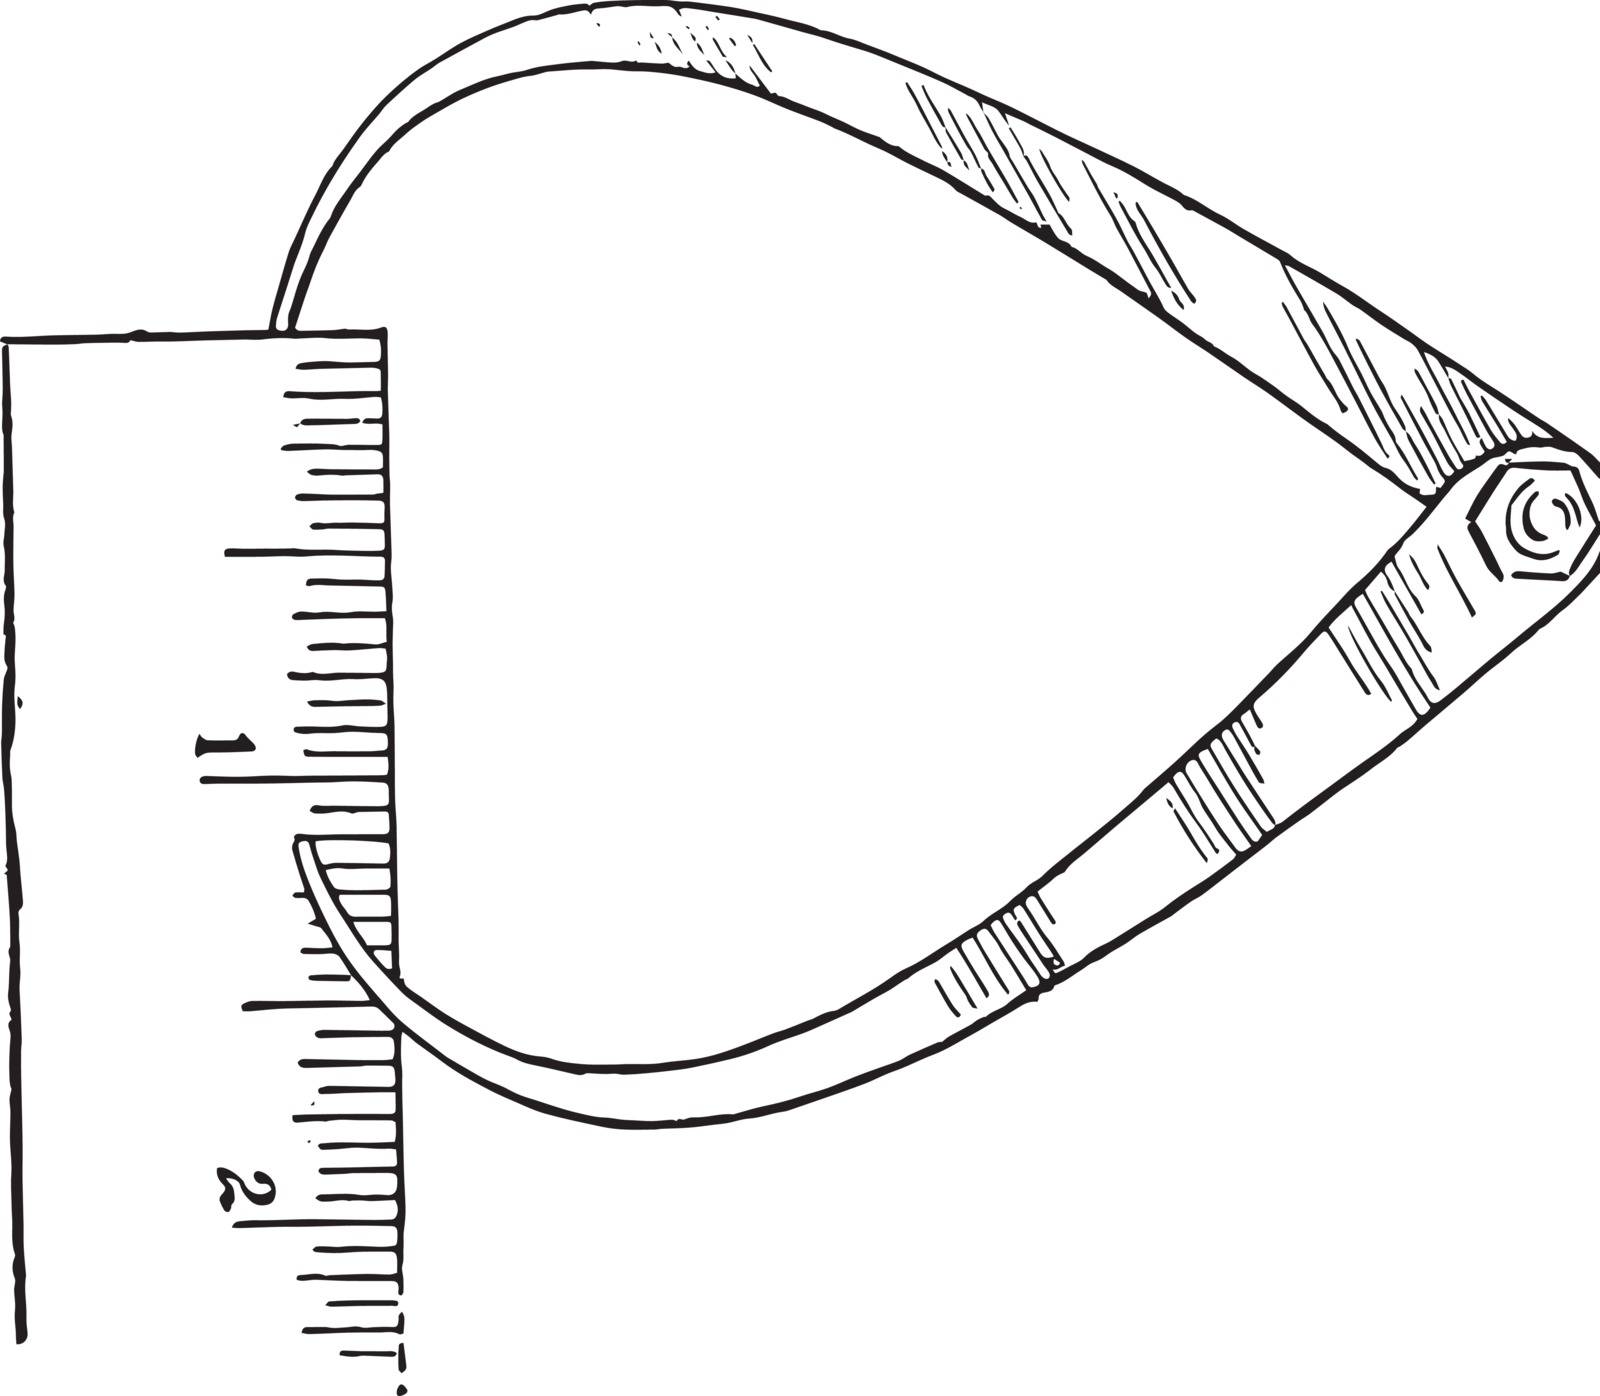 Reading the Outside Caliper are adjusted to fit across the points, tips with a measuring tool such as a ruler, vintage line drawing or engraving illustration.